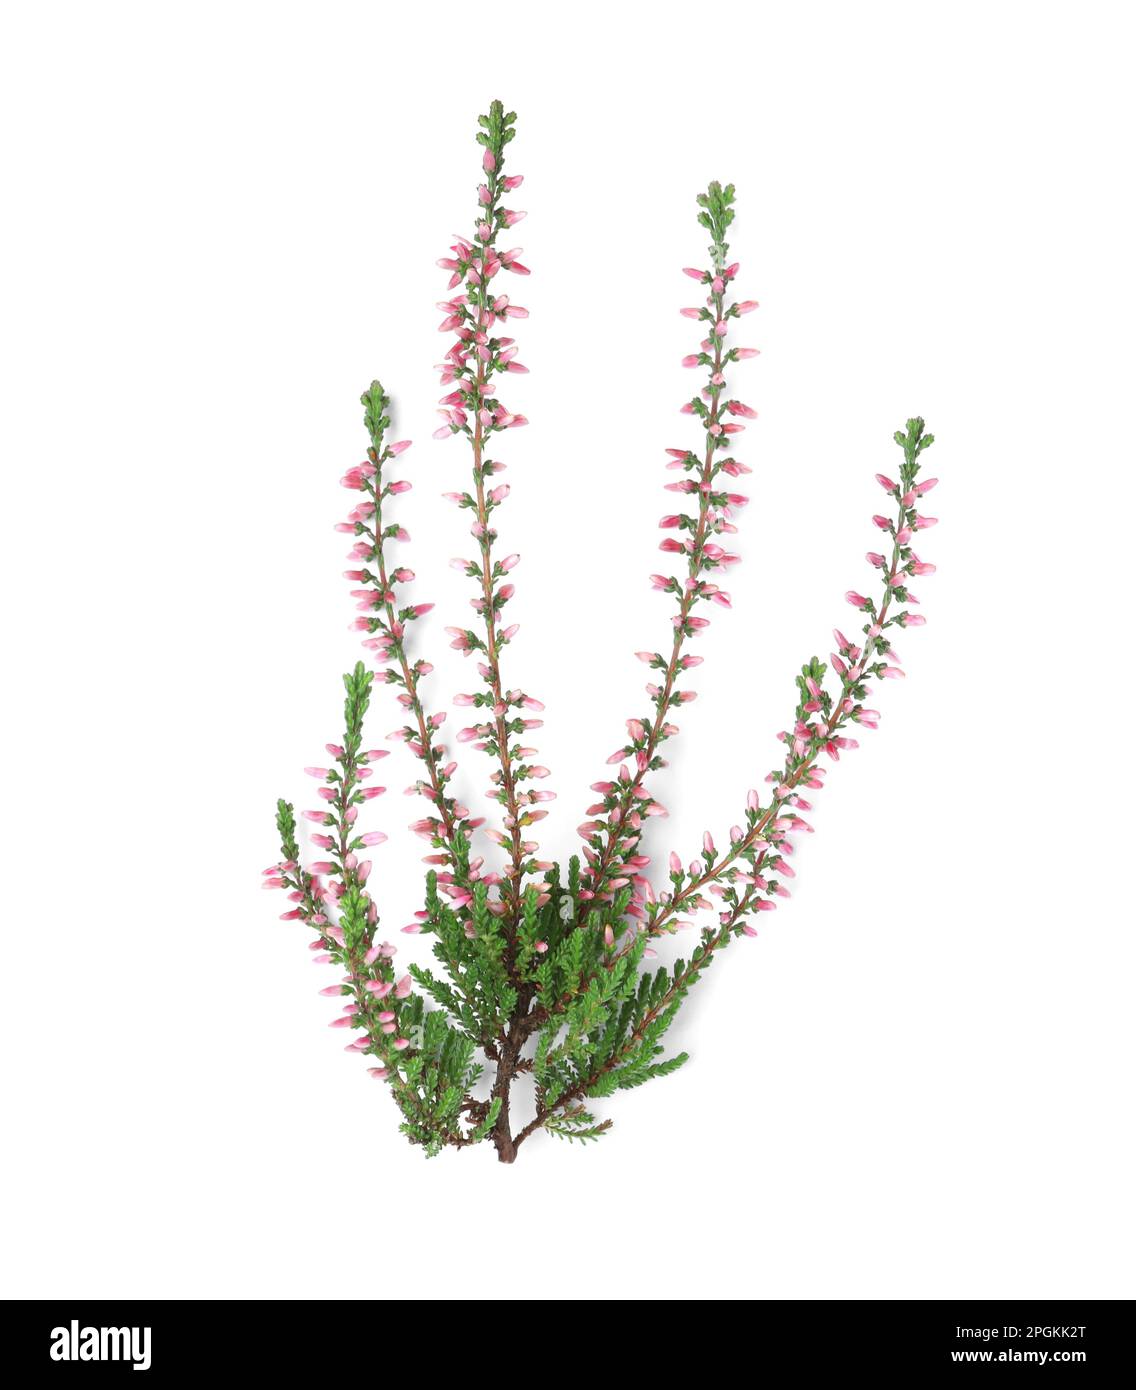 Branch of heather with beautiful flowers isolated on white Stock Photo